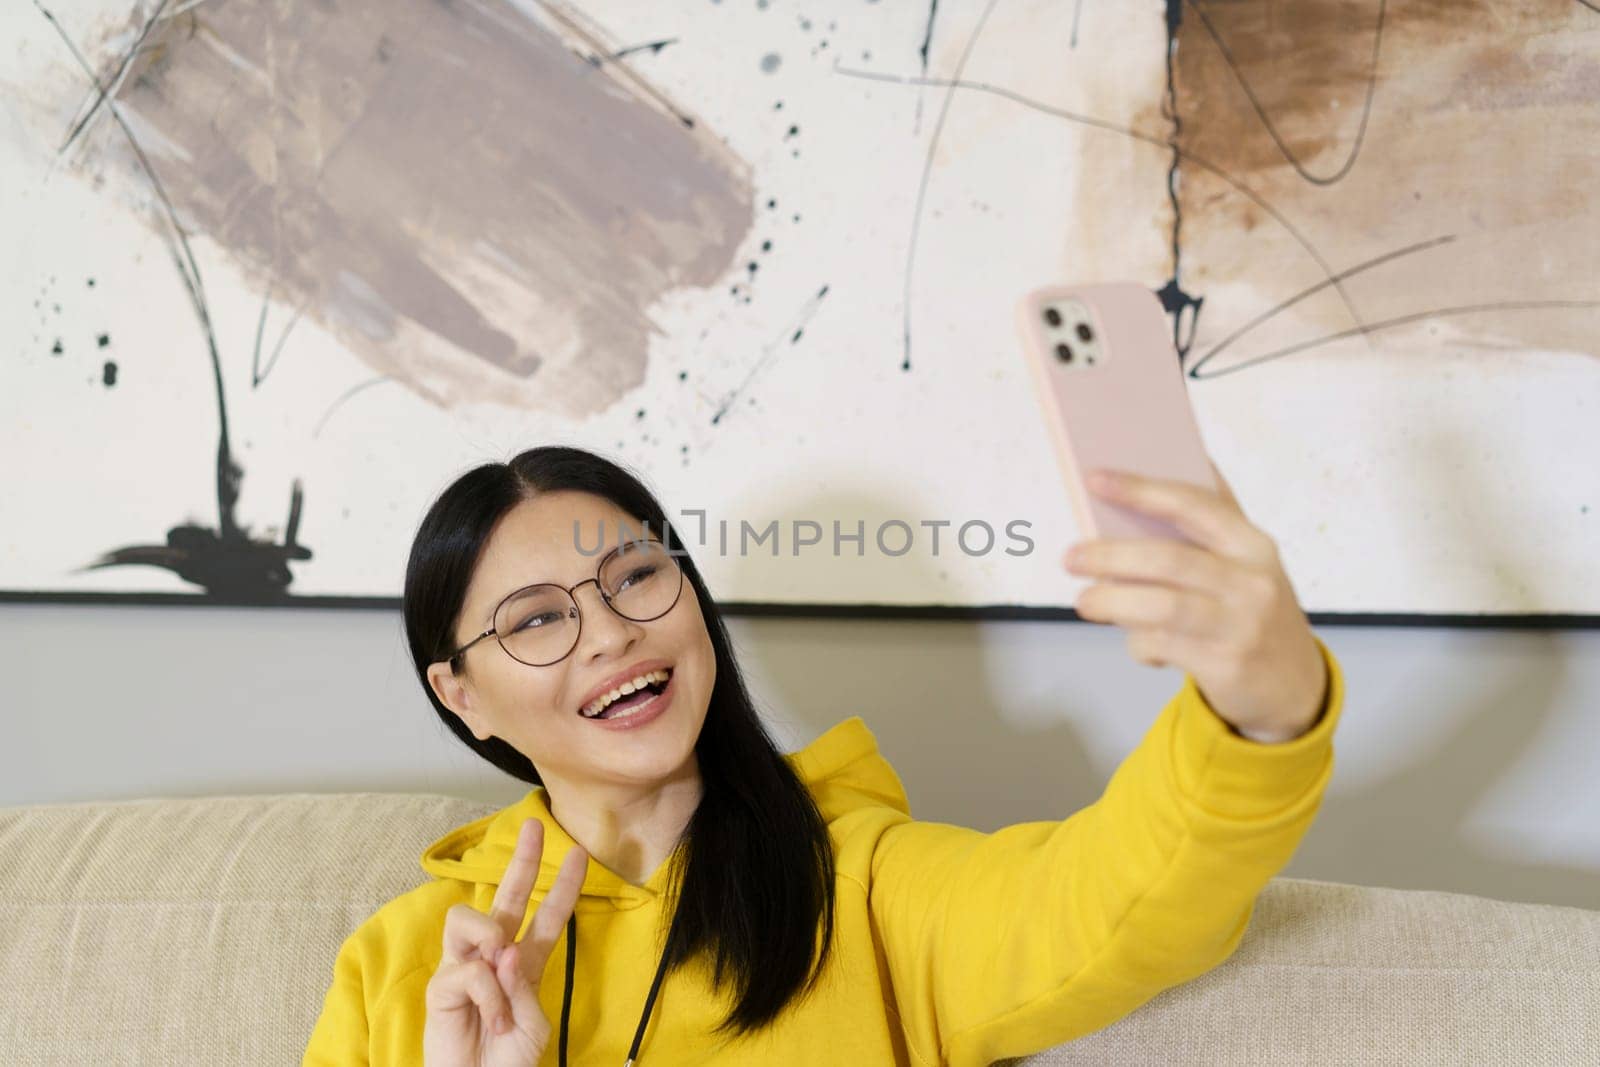 Asian student takes selfie with smartphone, utilizing the latest in mobile photography and communication technology. With glasses on, she captures self-portrait to share on social media or with friends online. High quality photo